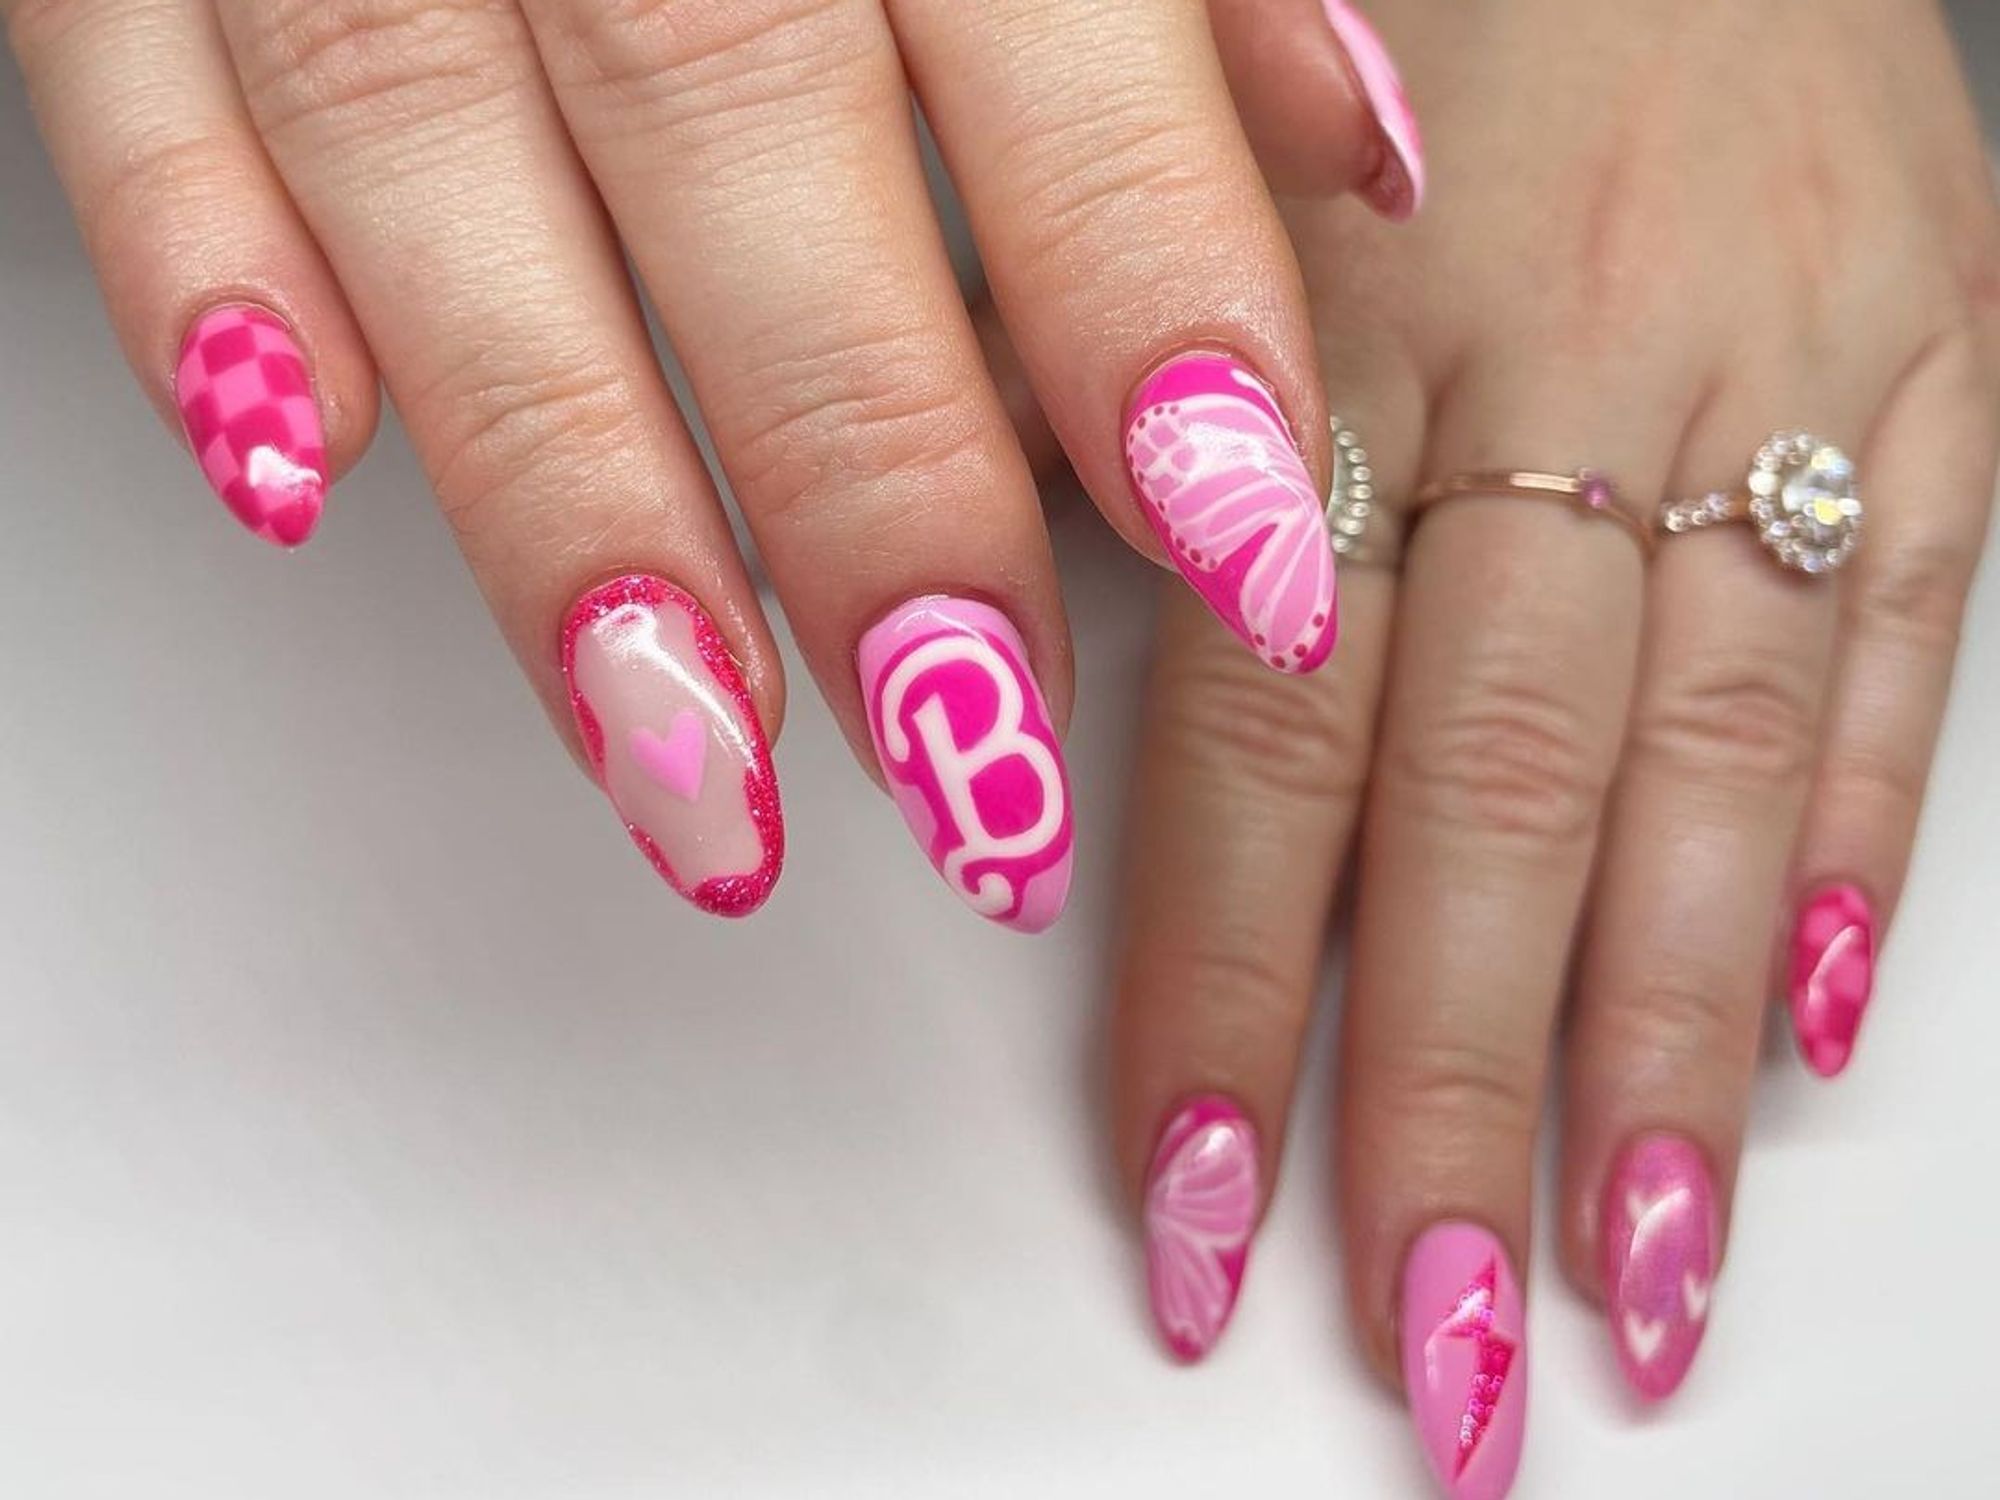 'Barbie' inspired nails